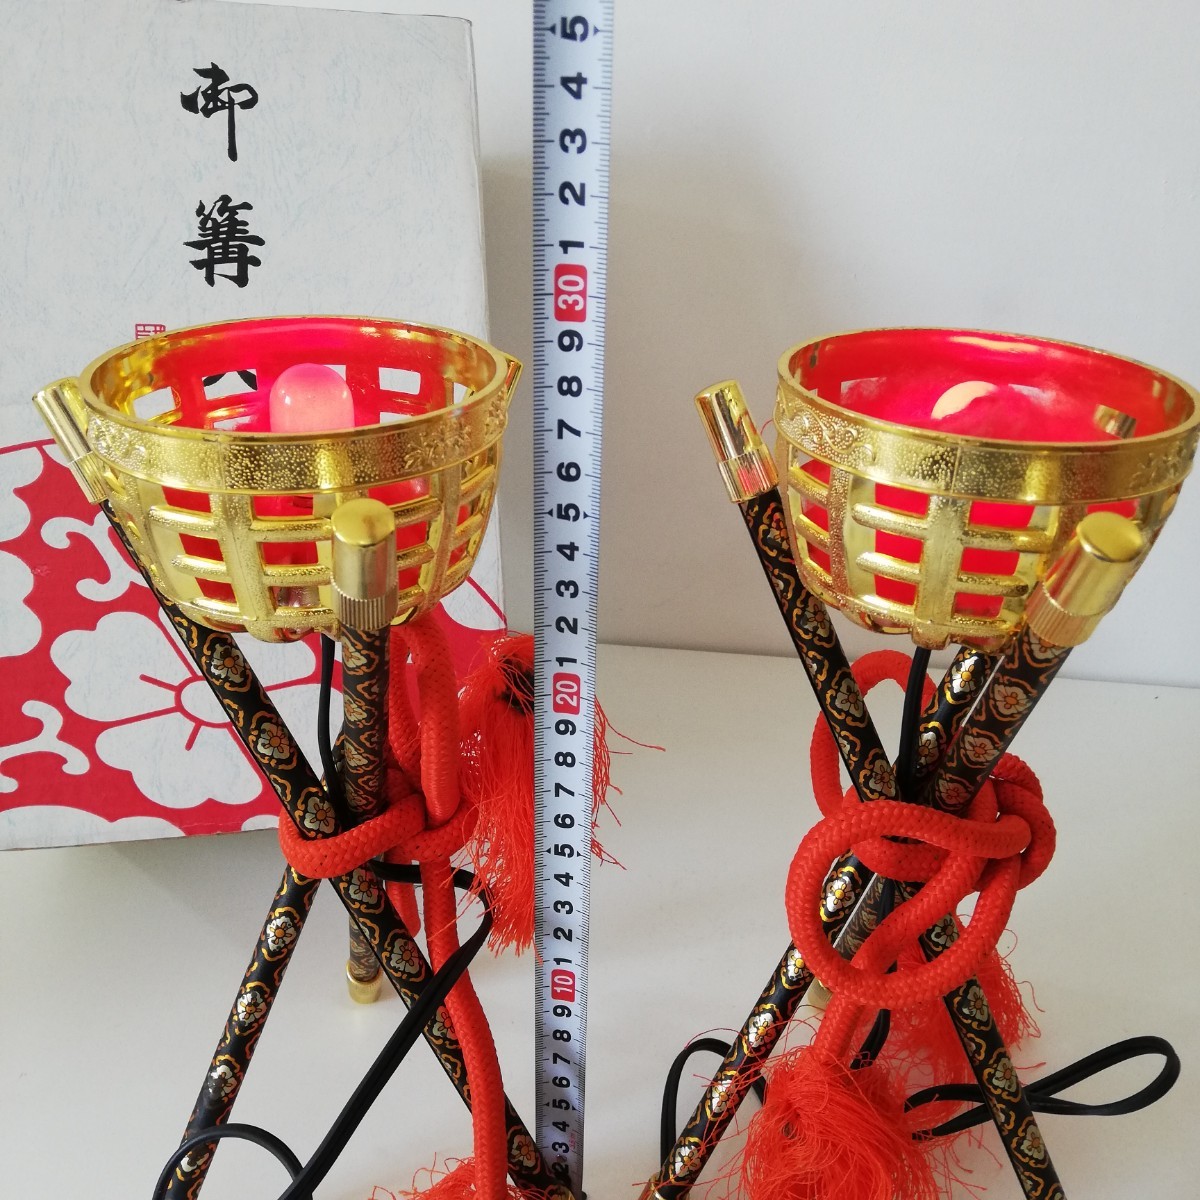  Boys' May Festival dolls decoration .. fire height 27.7cm electrification 0 [ bonfire lai playing cards pine Akira Japanese style ornament ]